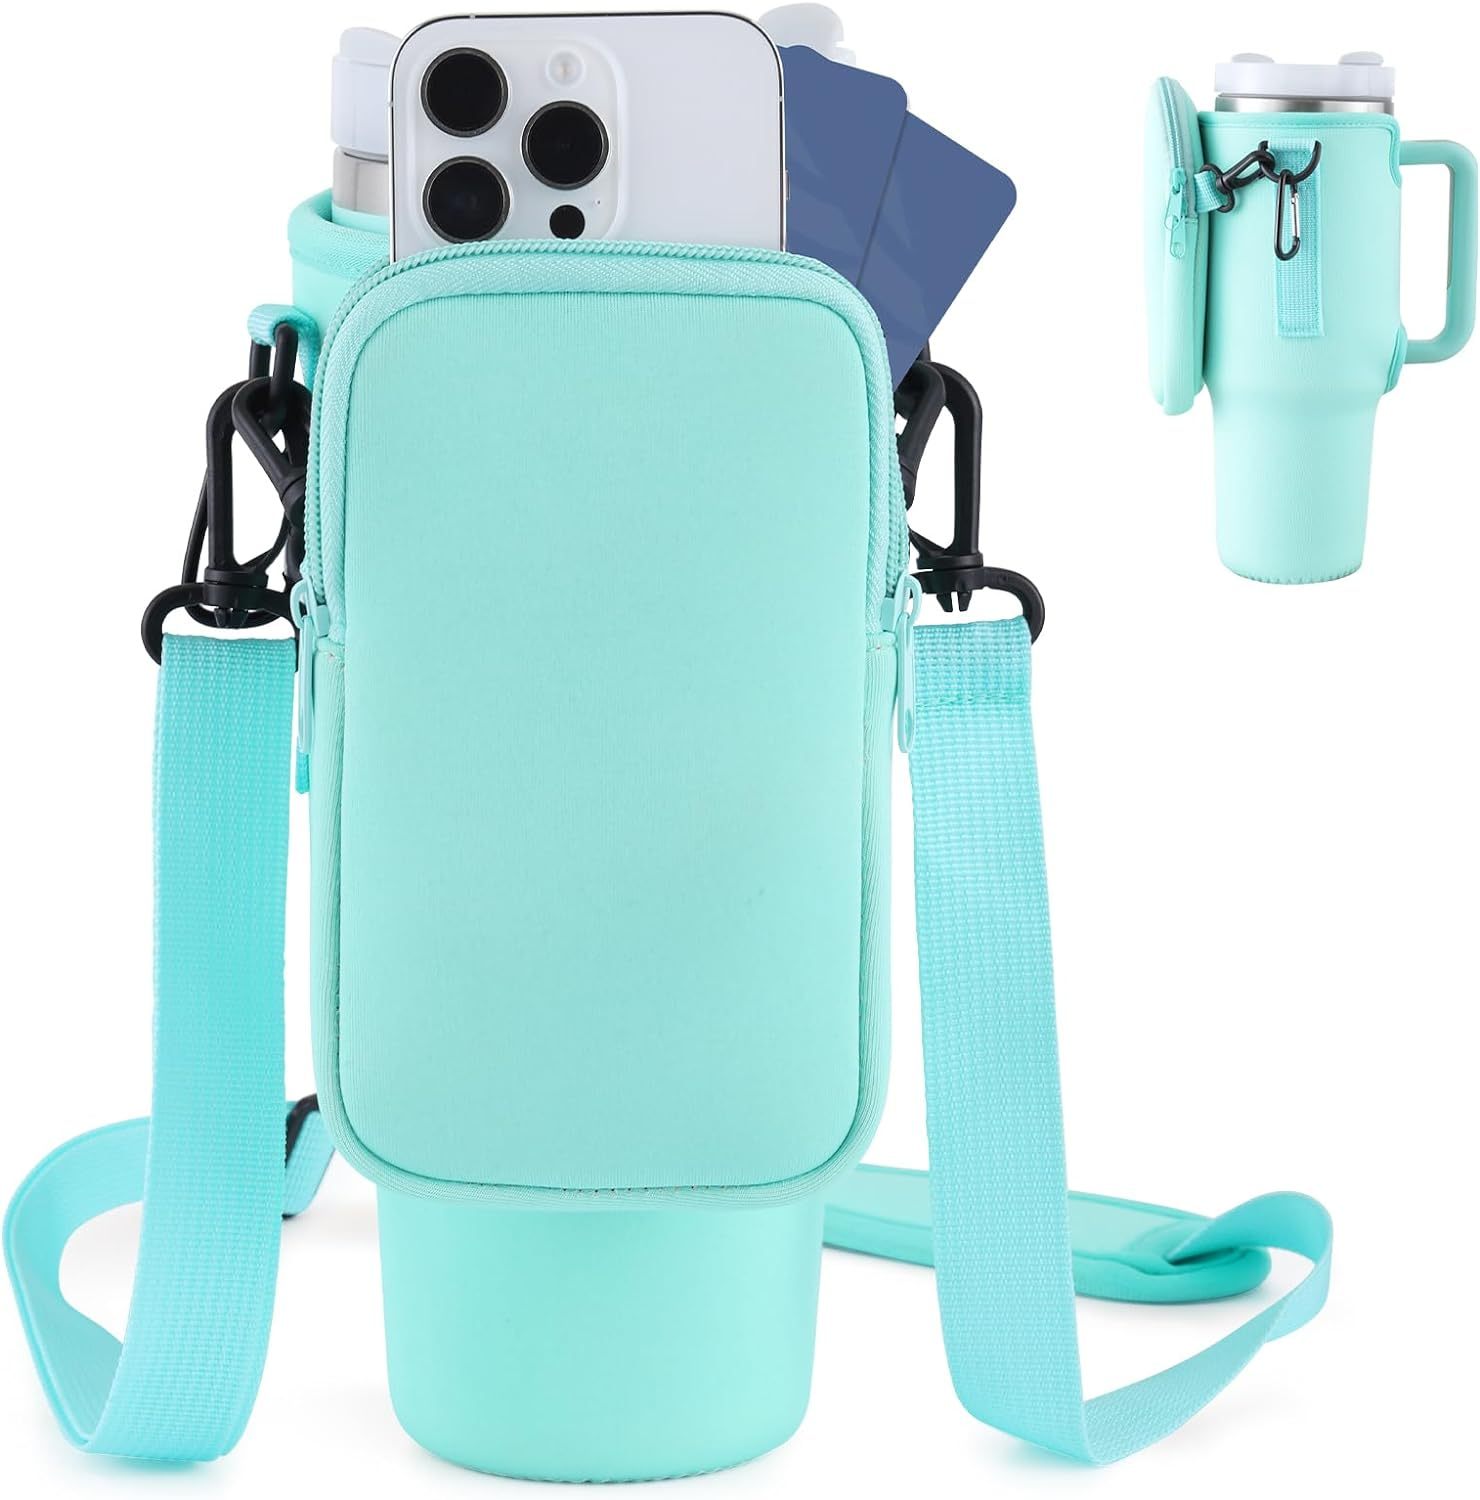 Neoprene Water Bottle & phone Carrier with Adjustable Strap